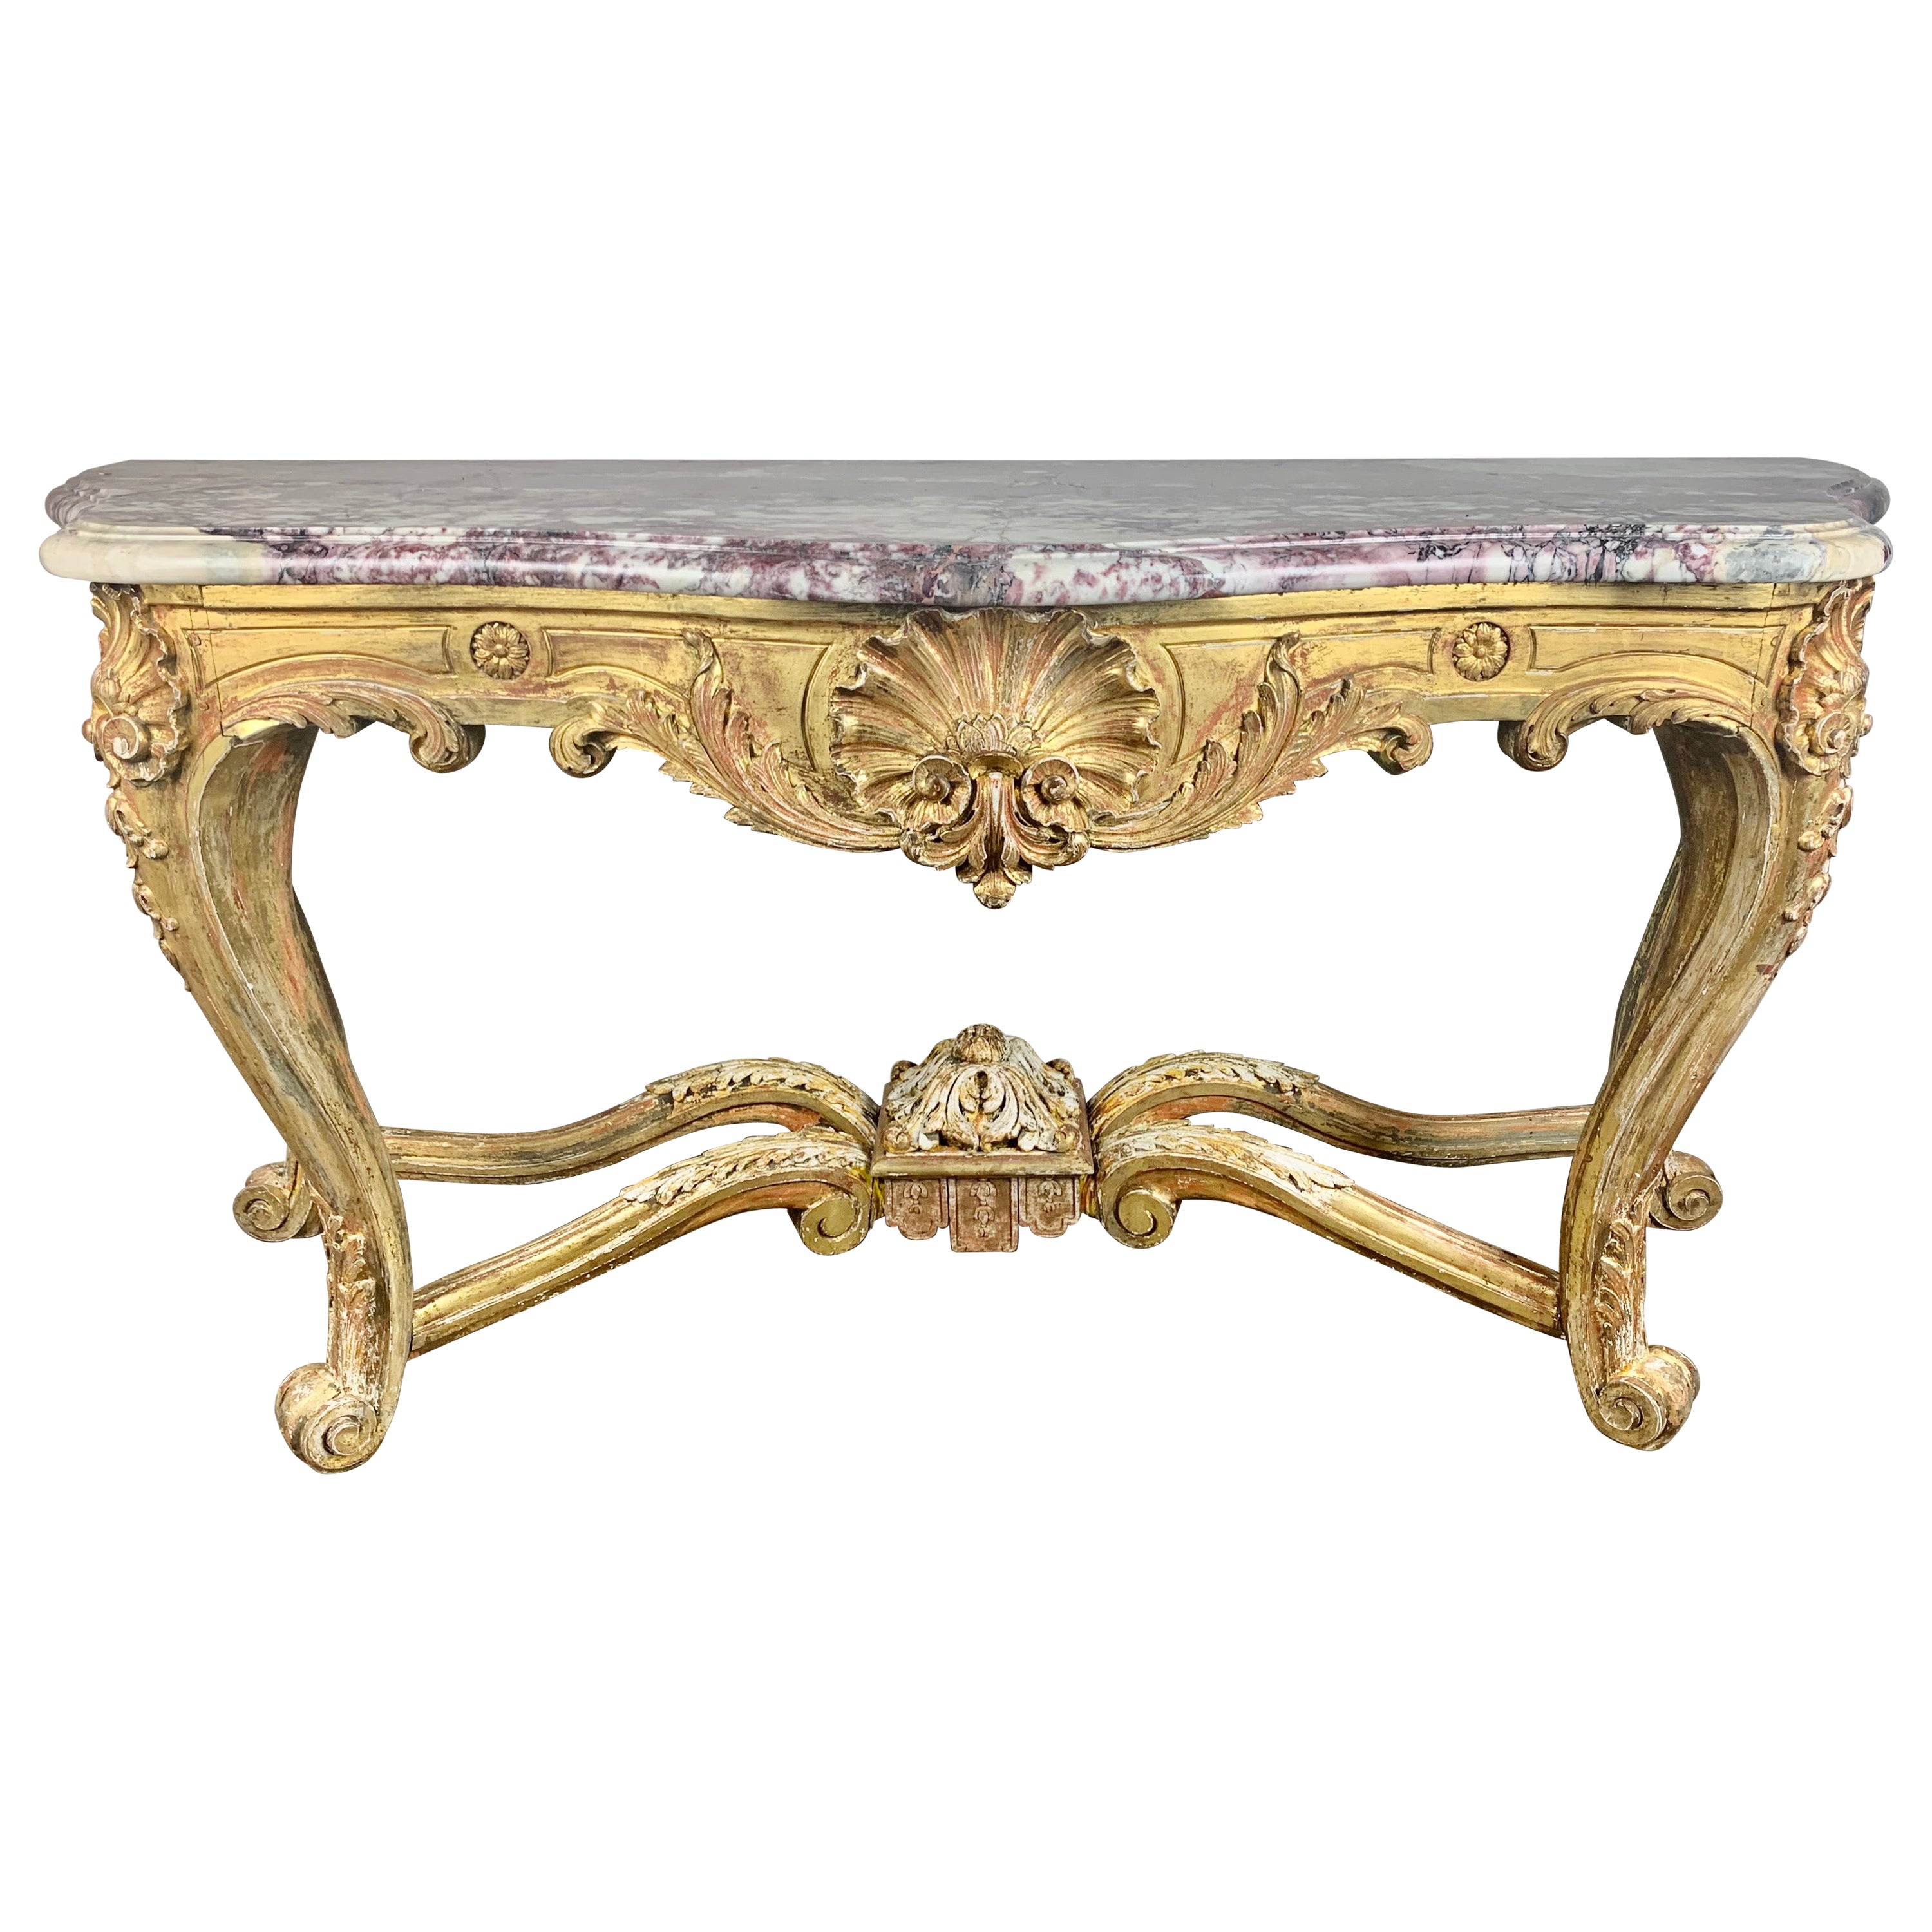 19th C. French Giltwood Rococo Style Console with Marble Top